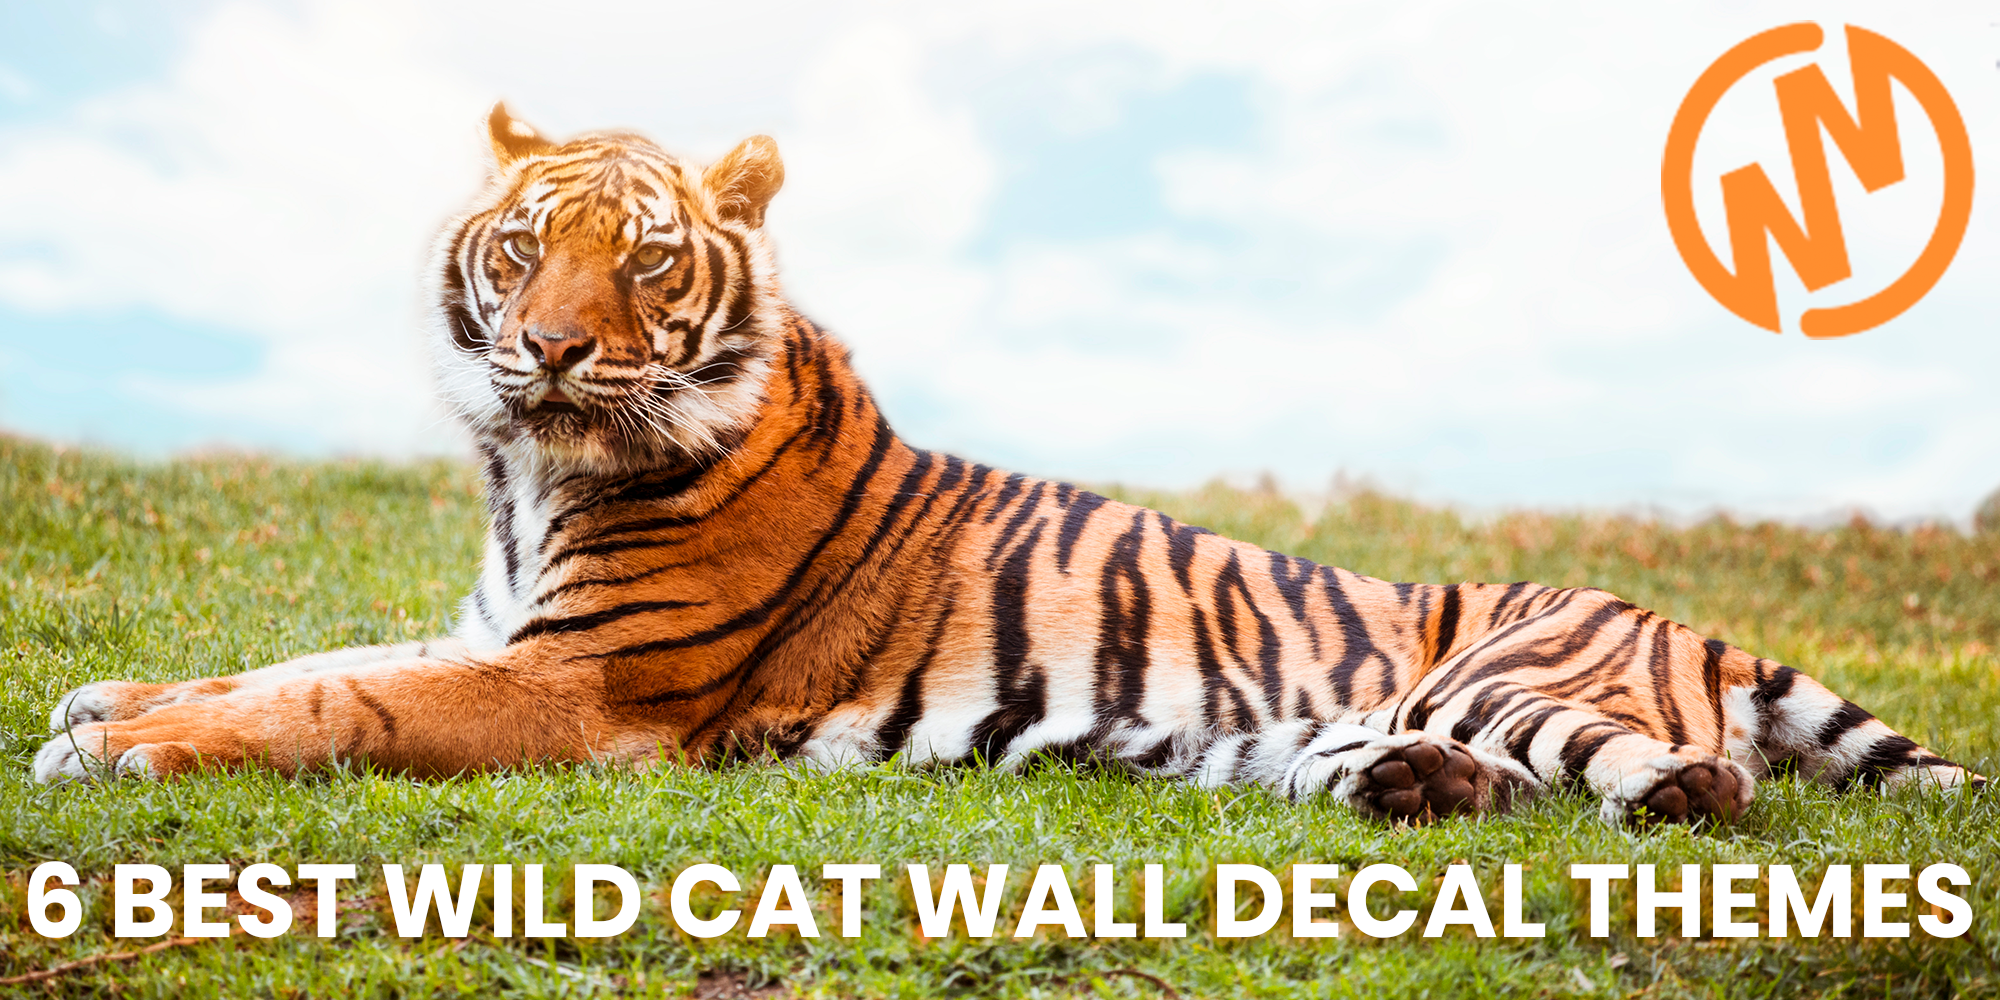 6 Wild Cat Wall Decal Themes for Animal Lovers